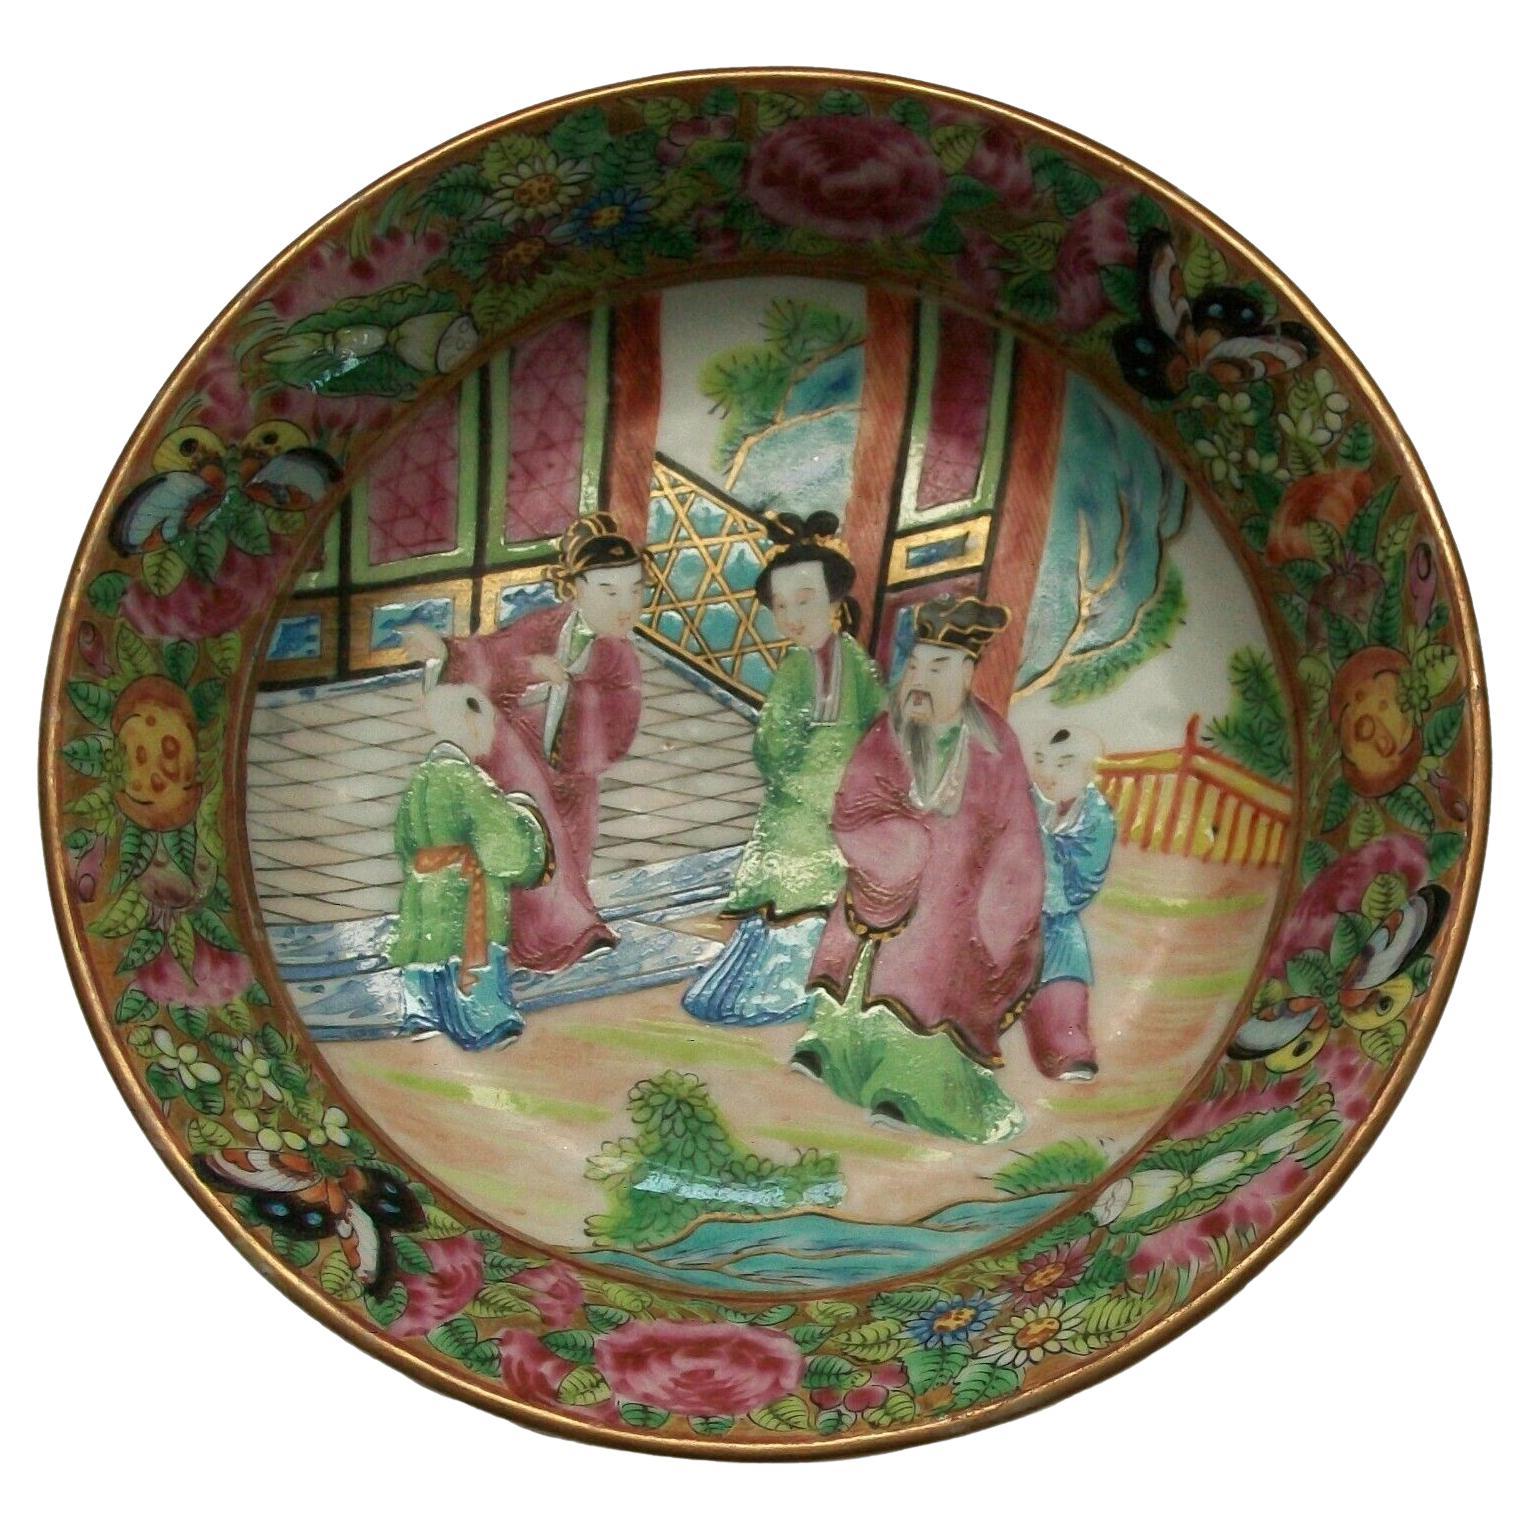 Antique Canton 'Famille Rose' Porcelain Plate, Unsigned, China, 19th Century